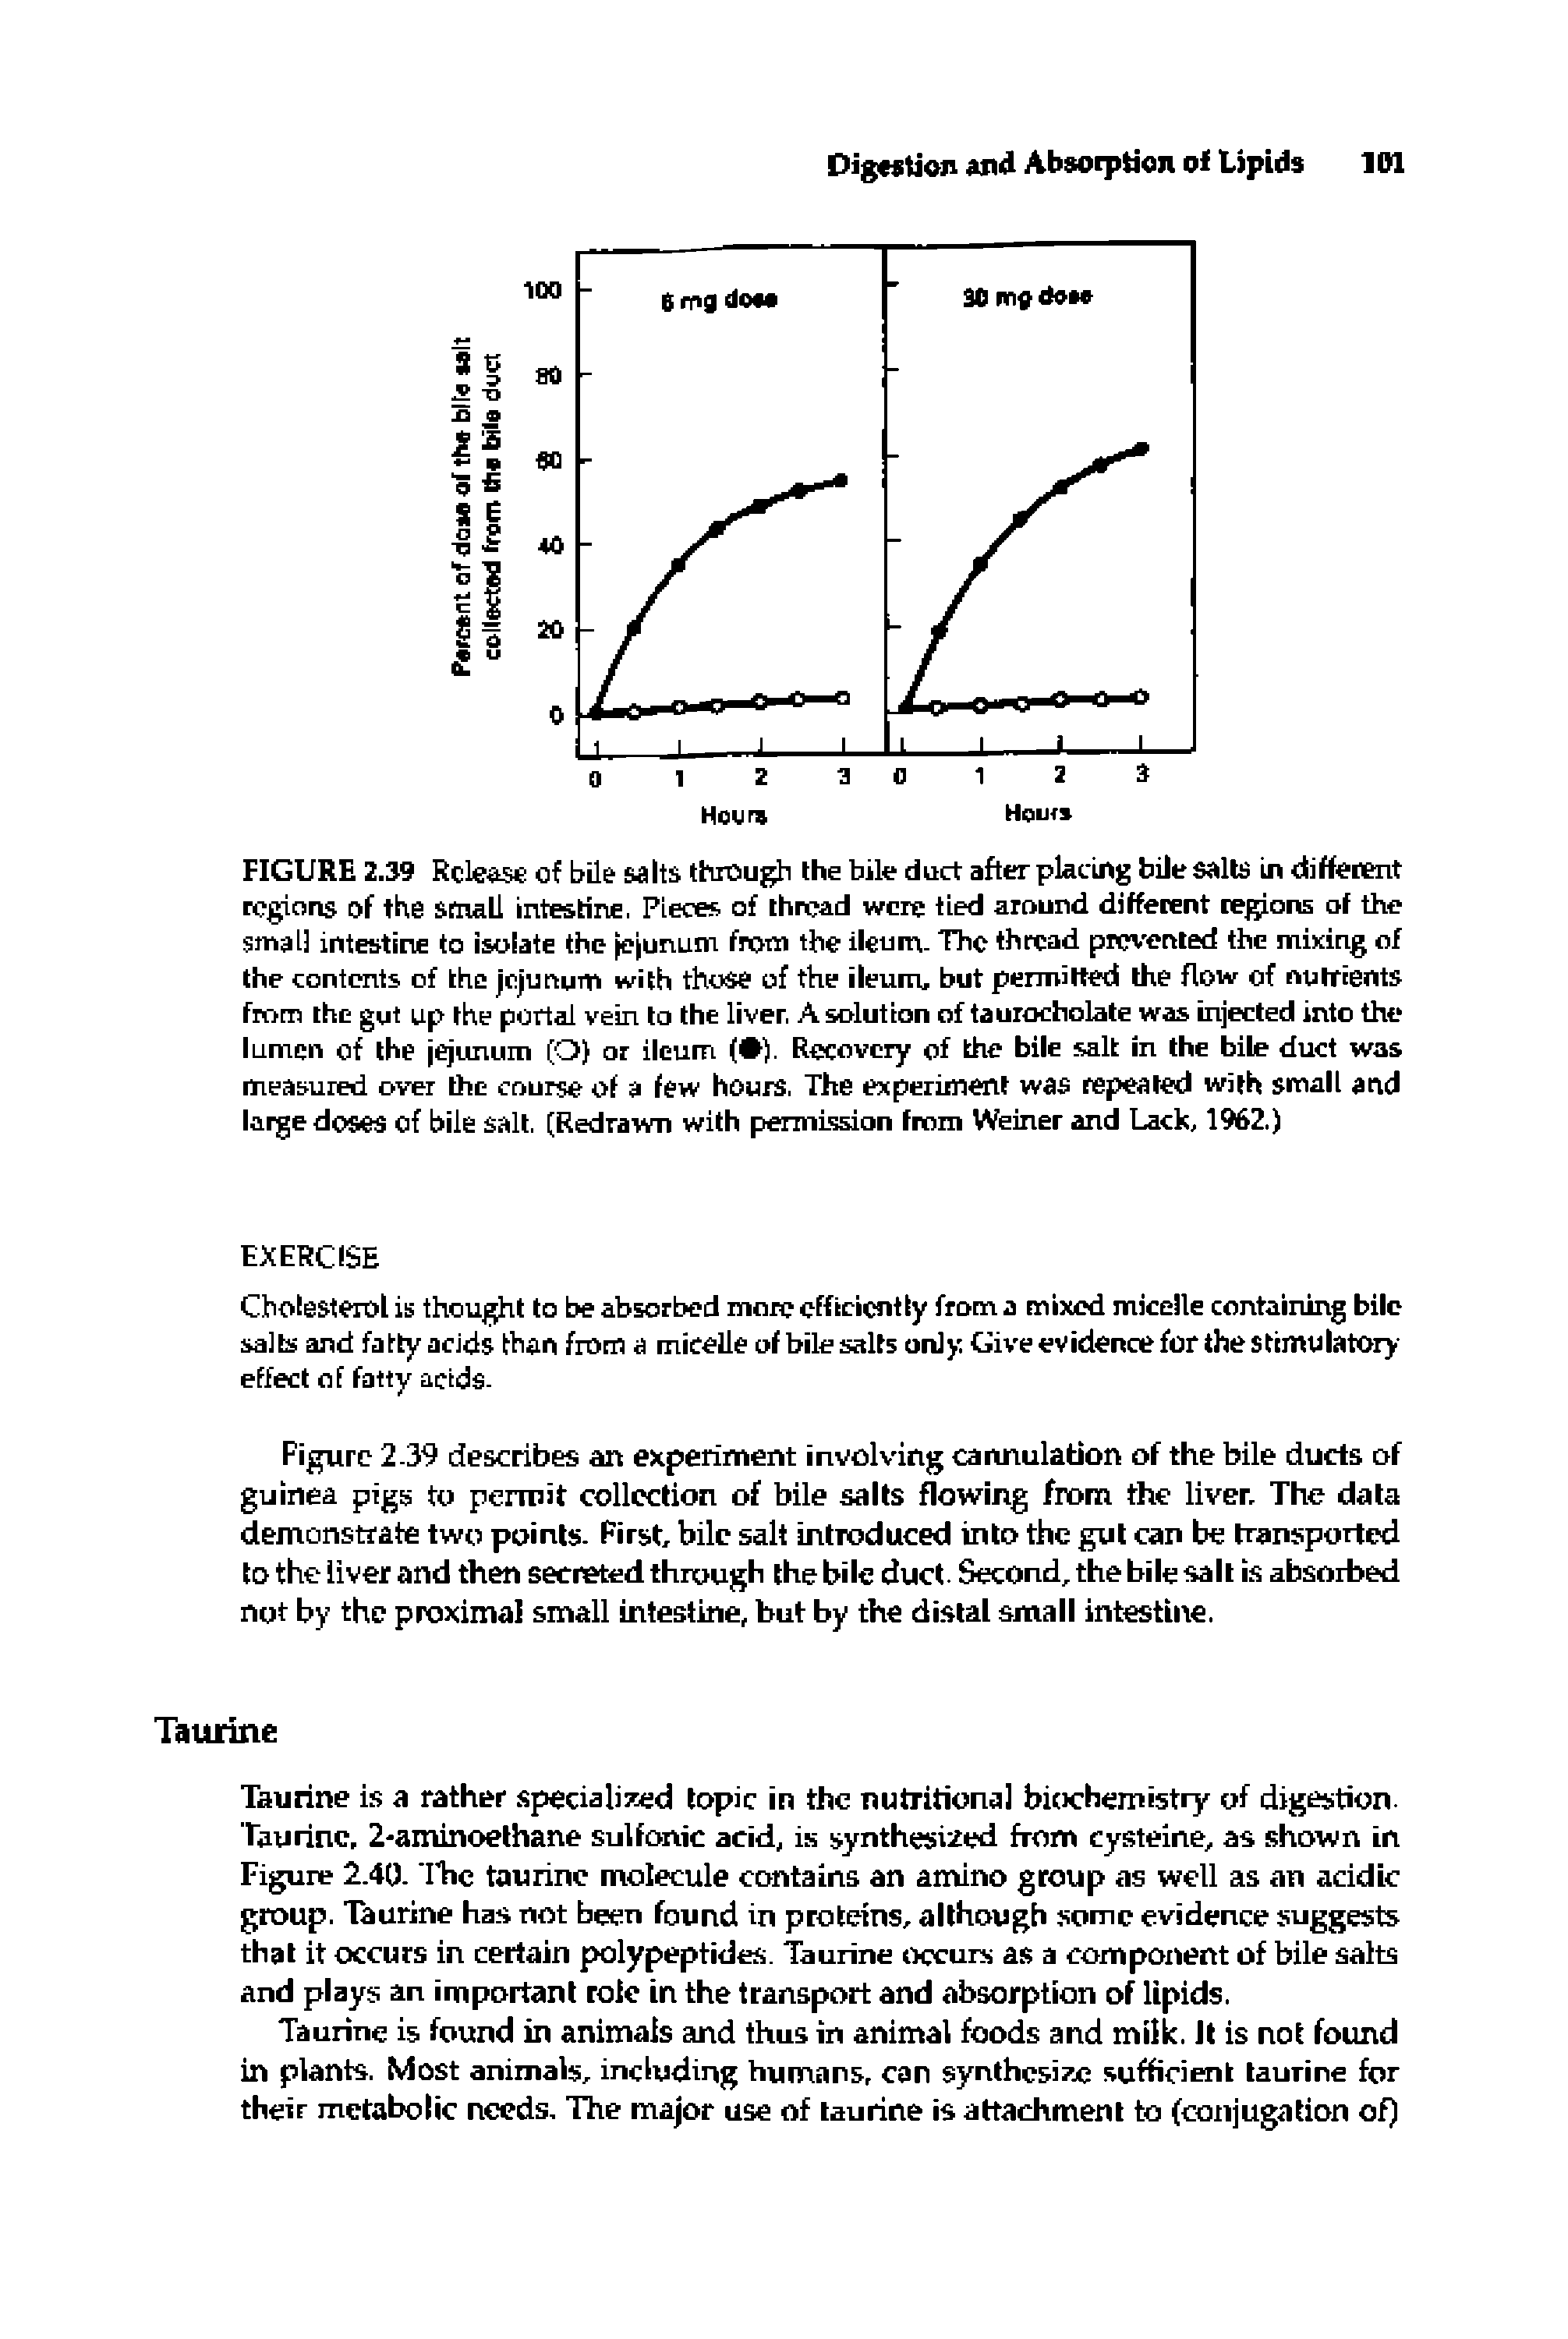 Figurc 2-39 describes an experiment involving caiuiulation of the bile ducts of guinea pigs to penrit collection of bile salts flowing from the liver The data demonstrate two points. First bile salt introduced into the gut can be transported to the liver and then secreted through the bile duct. Second, the bile salt is absorbed not by the proximal small intestine, but by the distal small intestine.